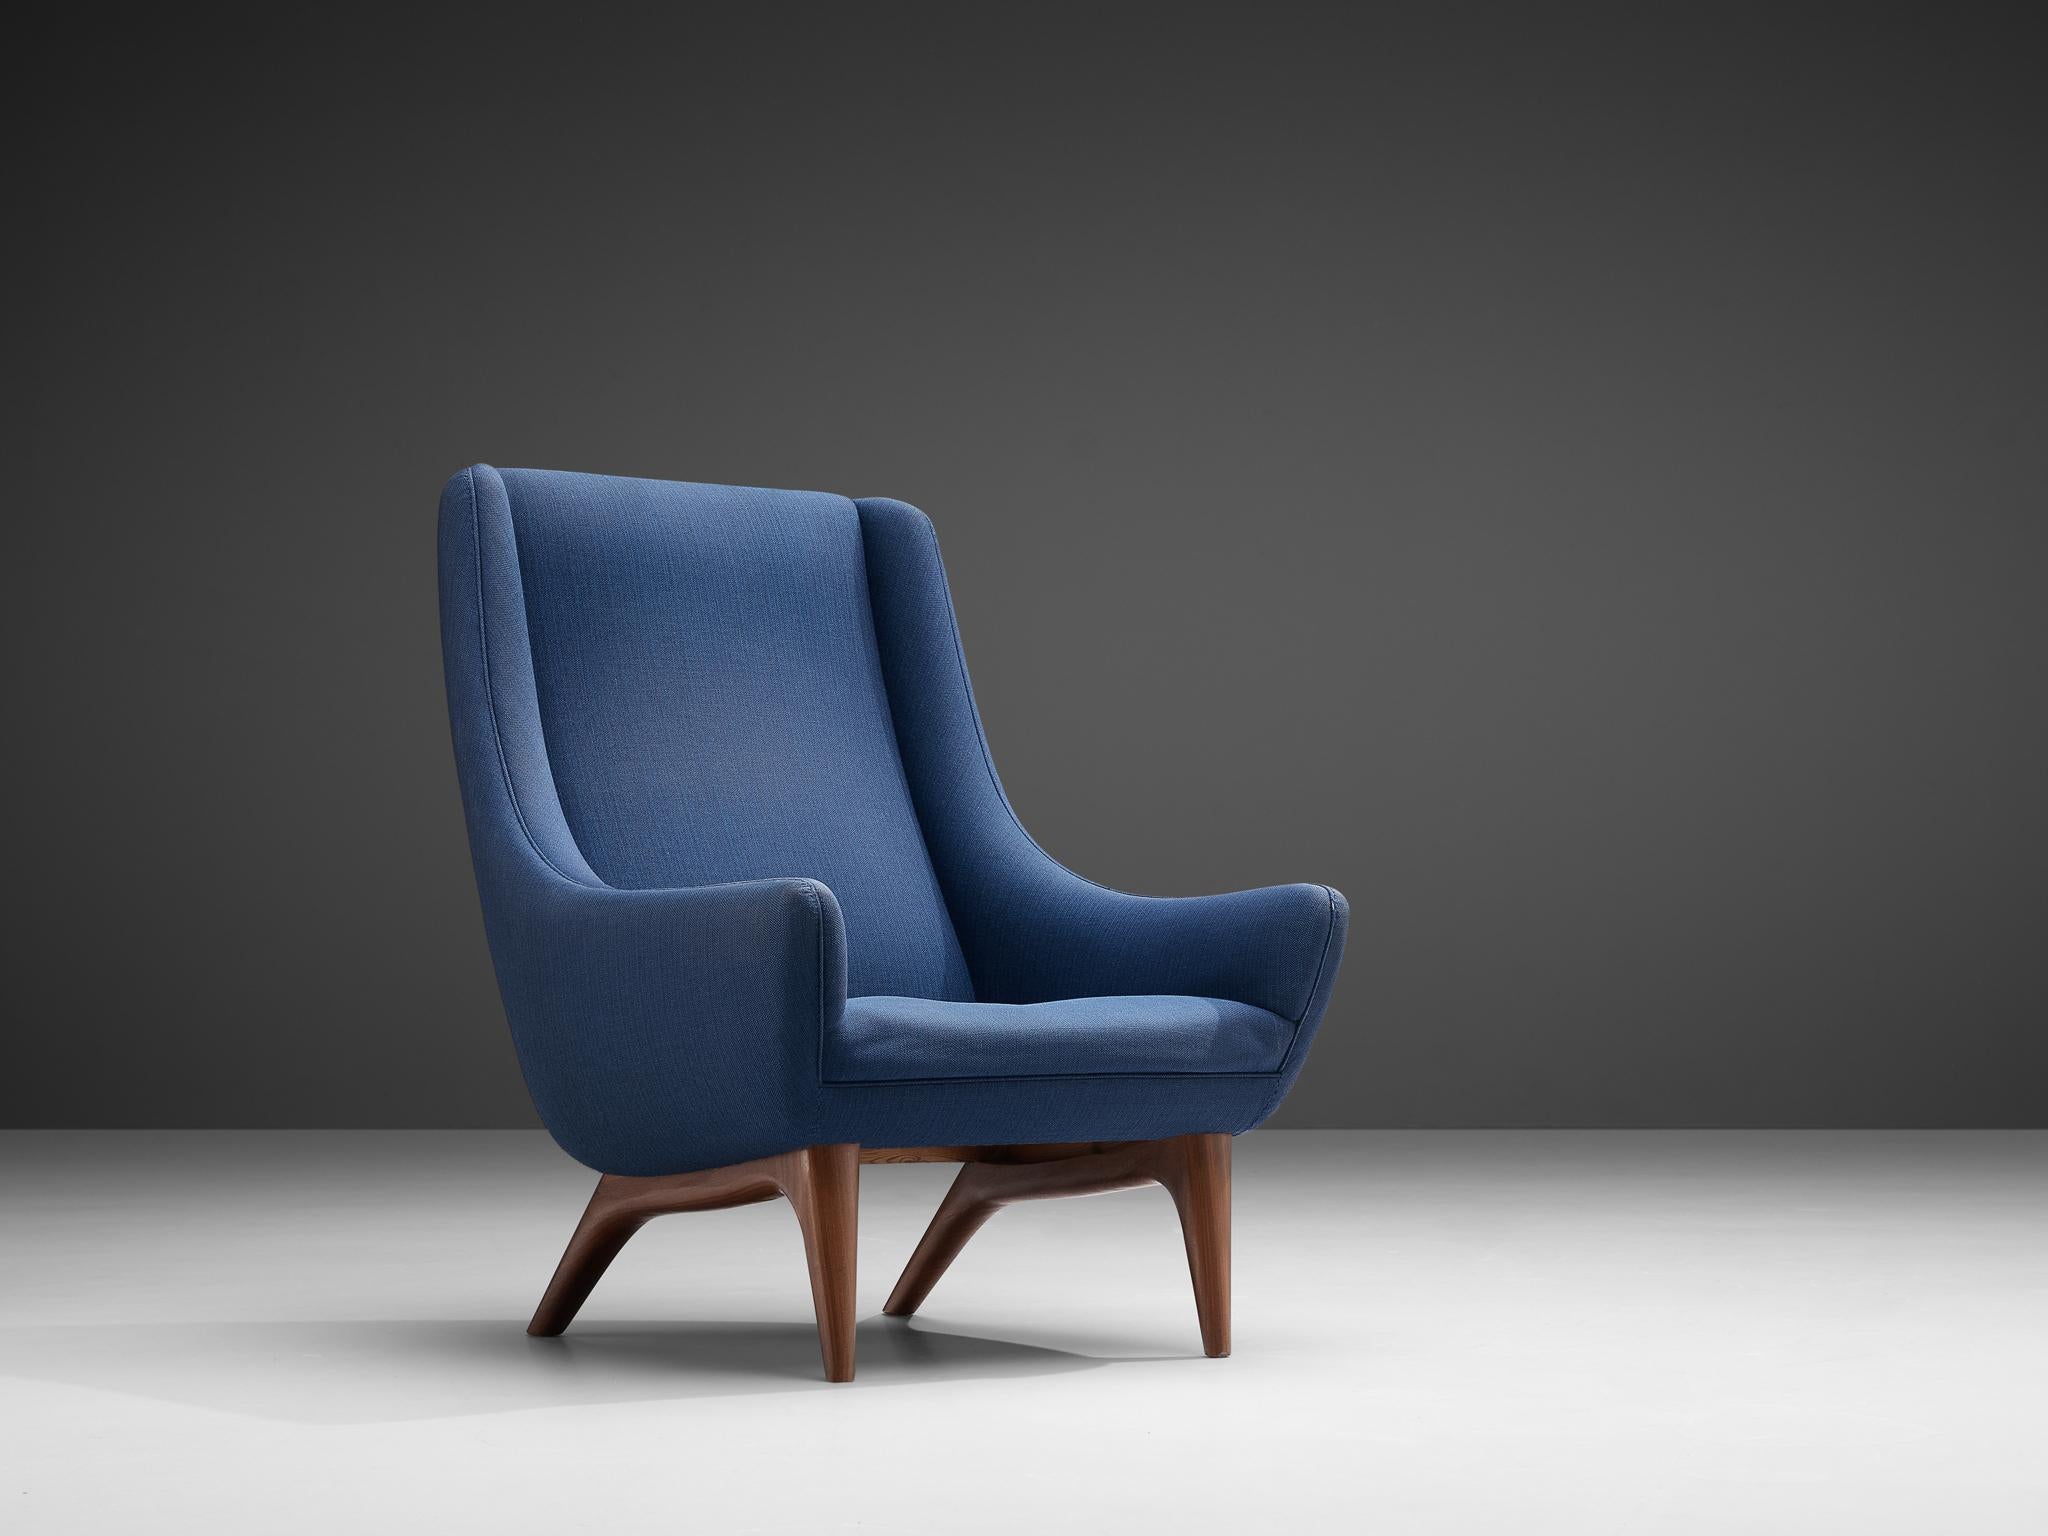 Illum Wikkelsø for A. Mikael Laursen & Søn, lounge chair model 'ML-140', fabric, teak Denmark, 1950s

Comfortable lounge chair by Danish designer Illum Wikkelsø. The shape of the chair is characterized by the high backrest that floats over into the